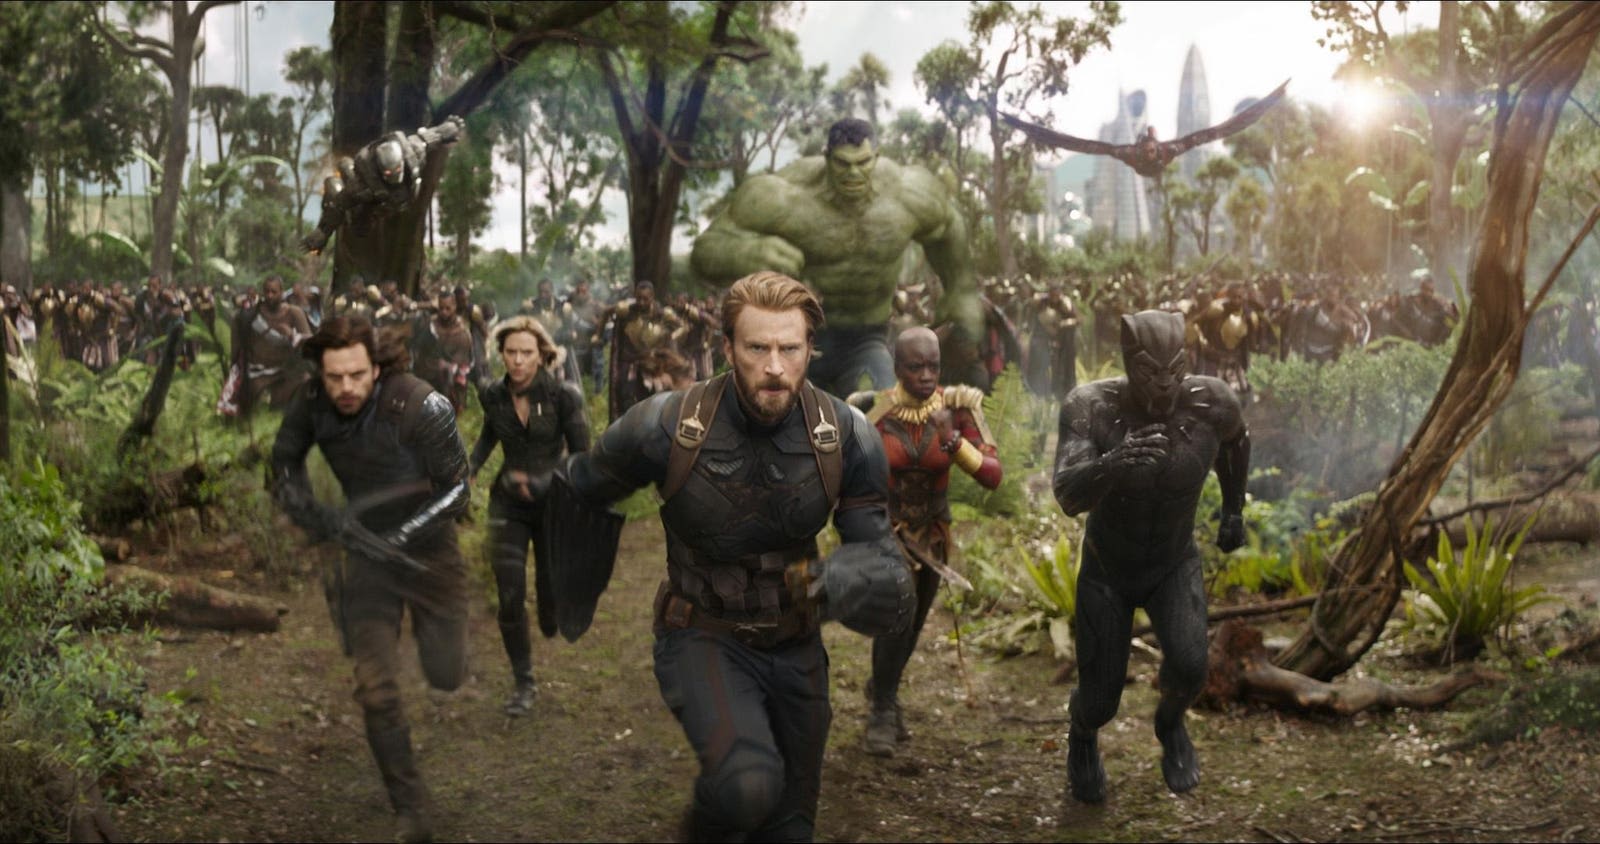 Why CGI Movies May Be The Secret To Marvel's Woes